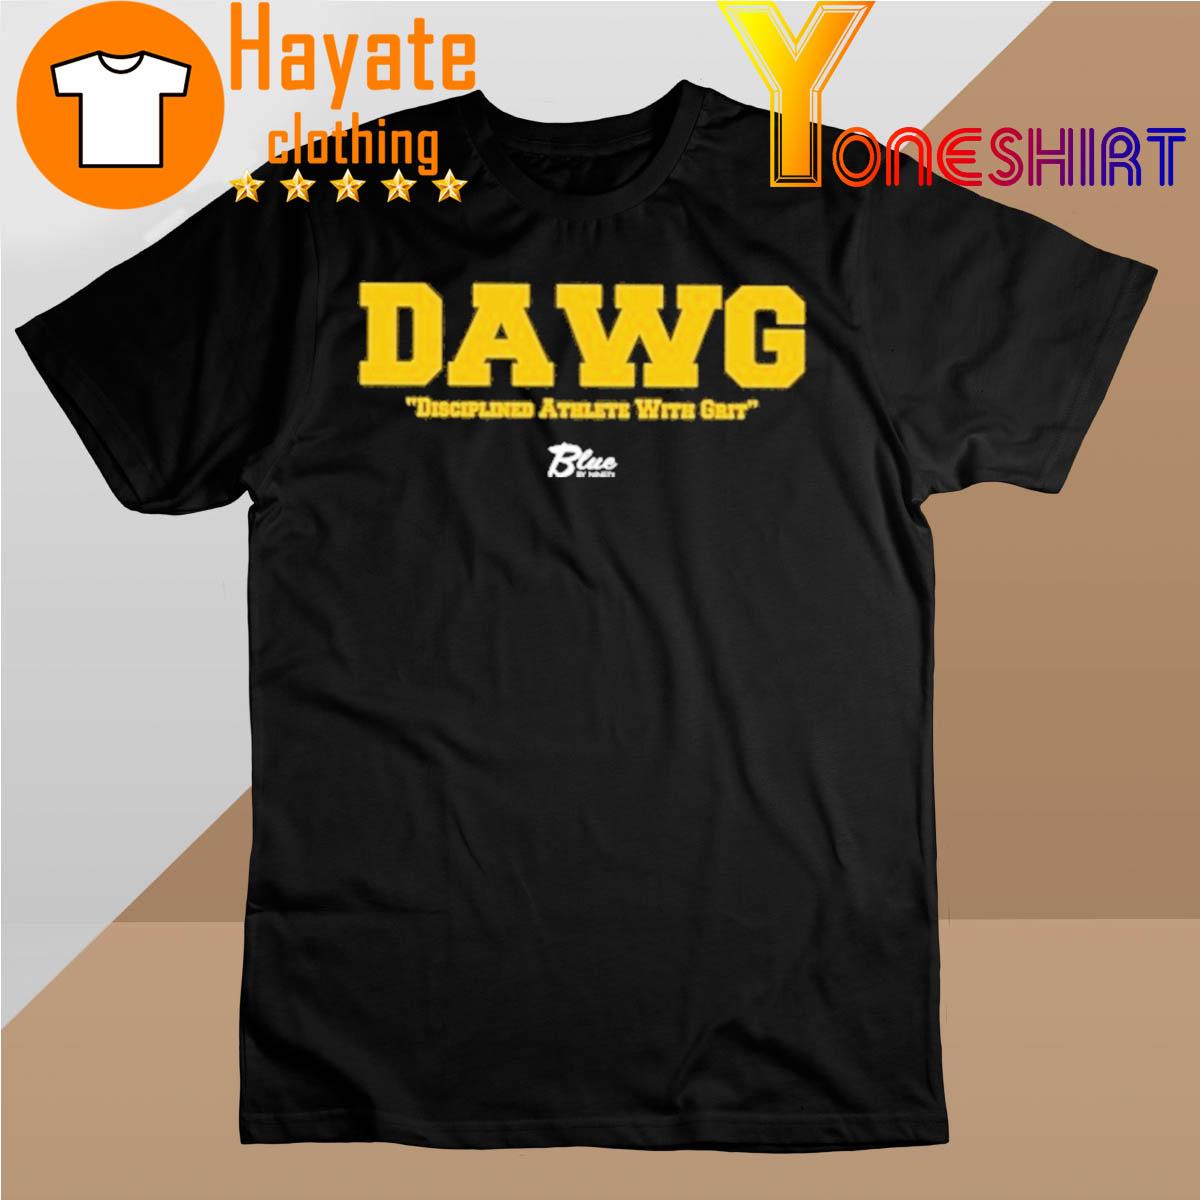 Dawg Disciplined Athlete With Grit shirt